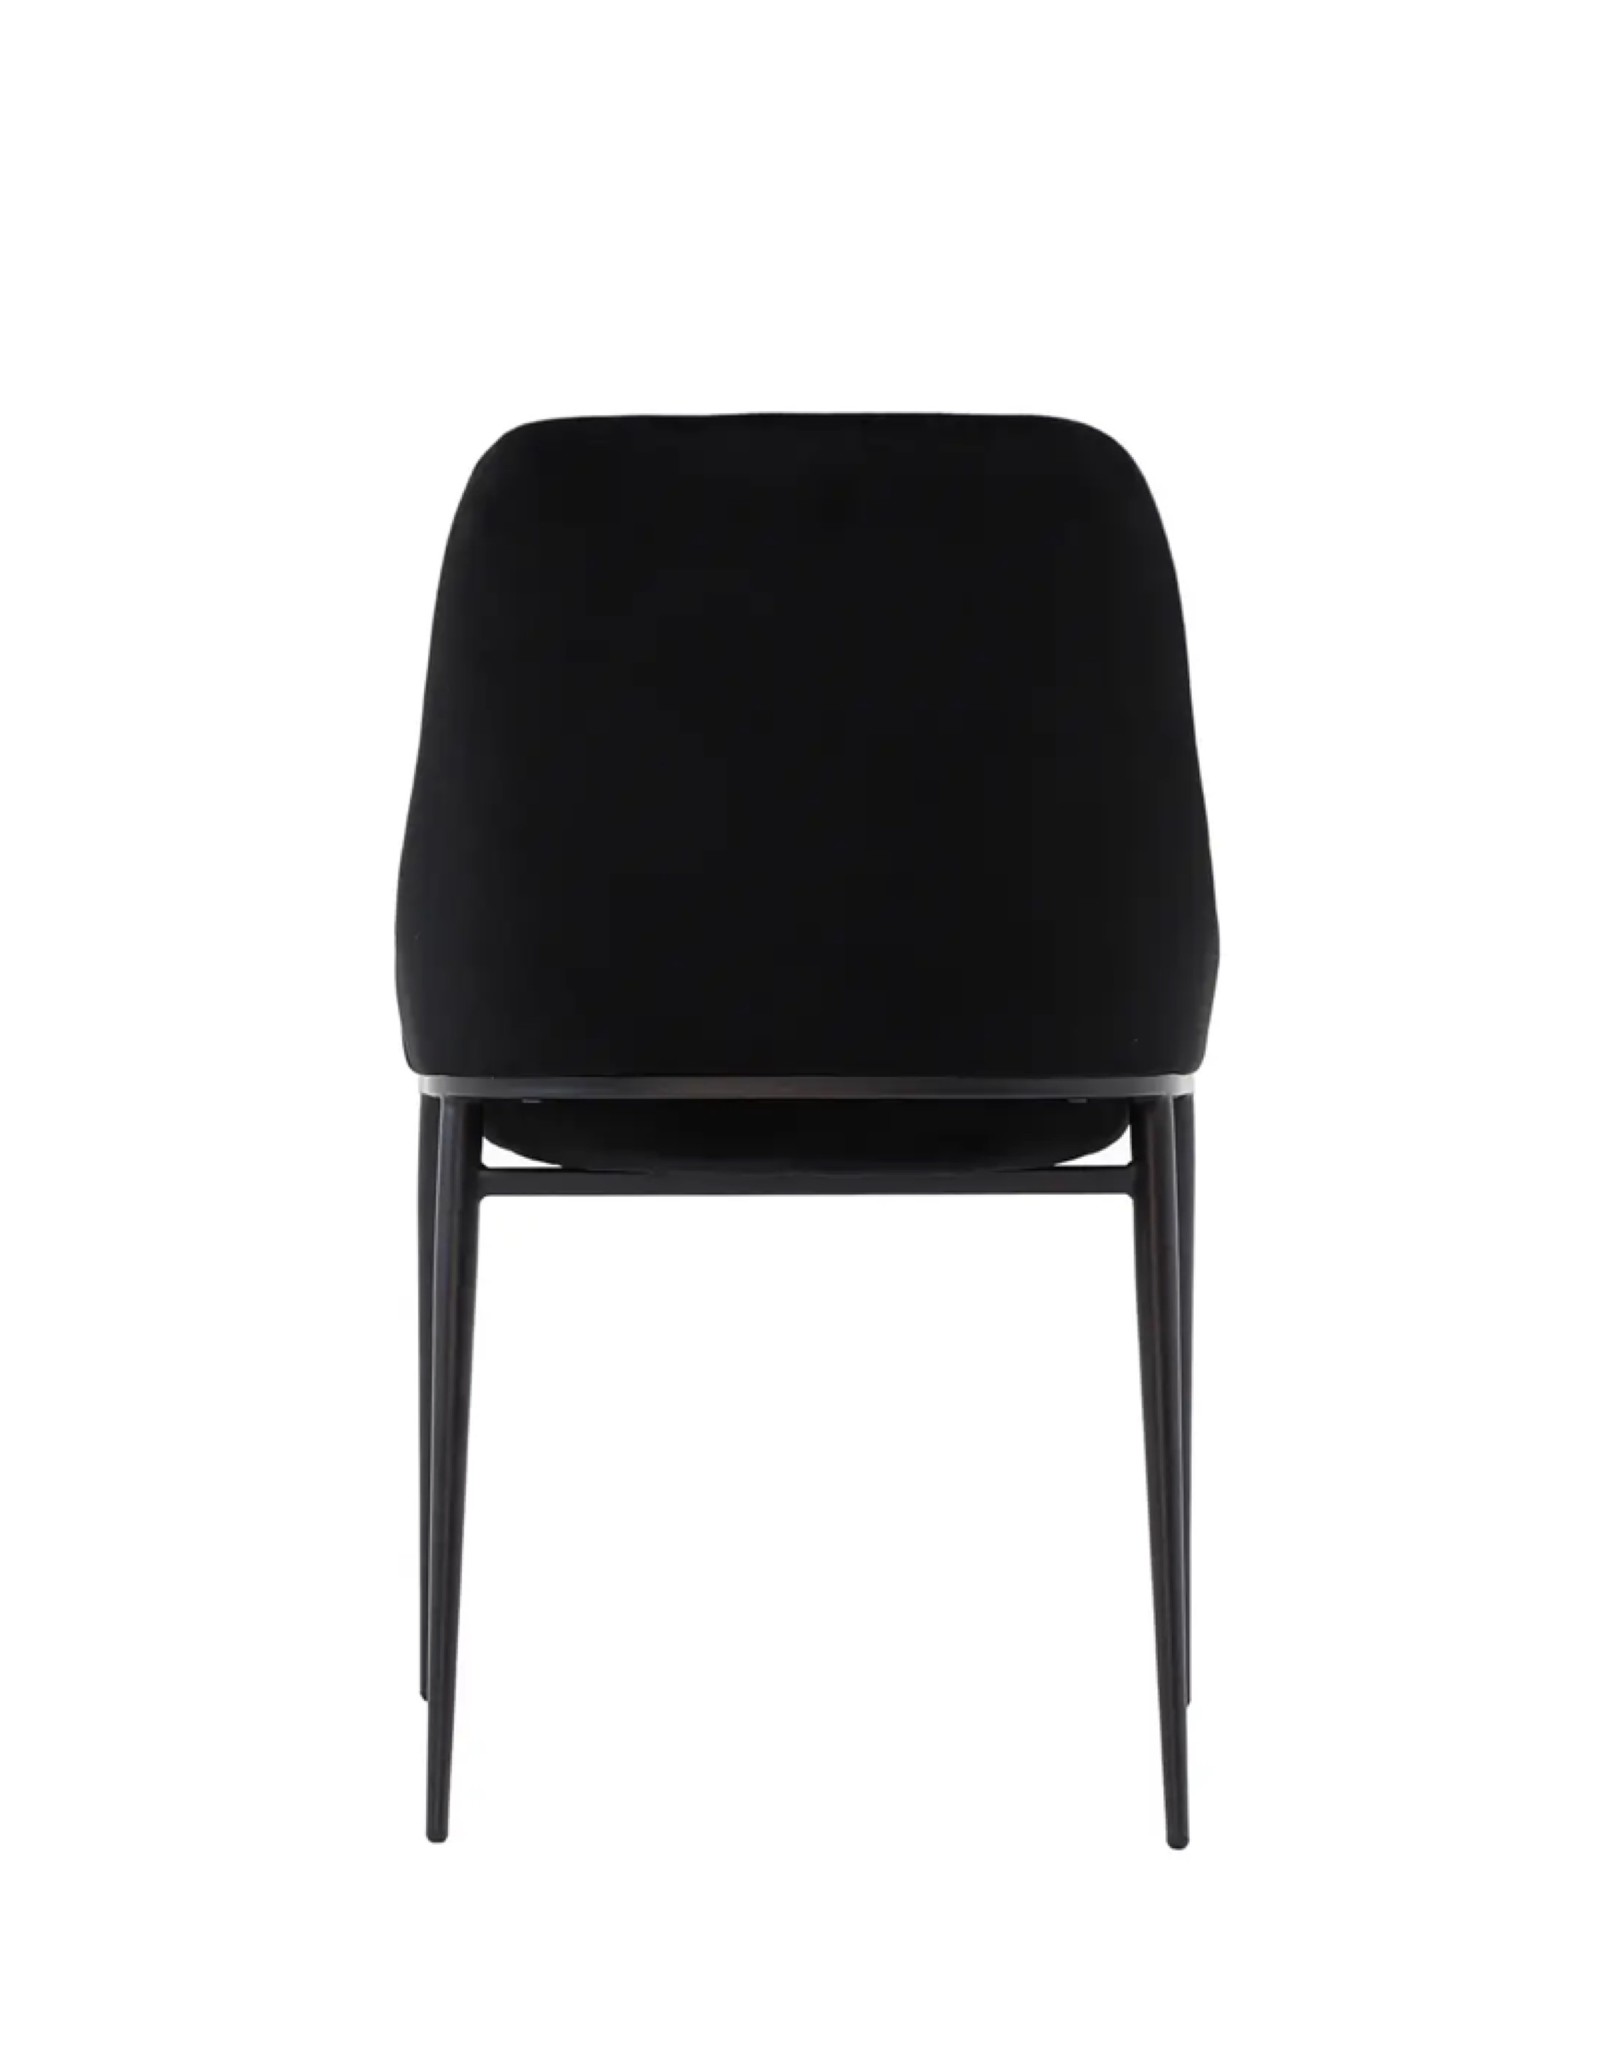 Moes Home Collection Moes Sedona Dining Chair Shadowed Black Velvet-M2 EJ-1034-02